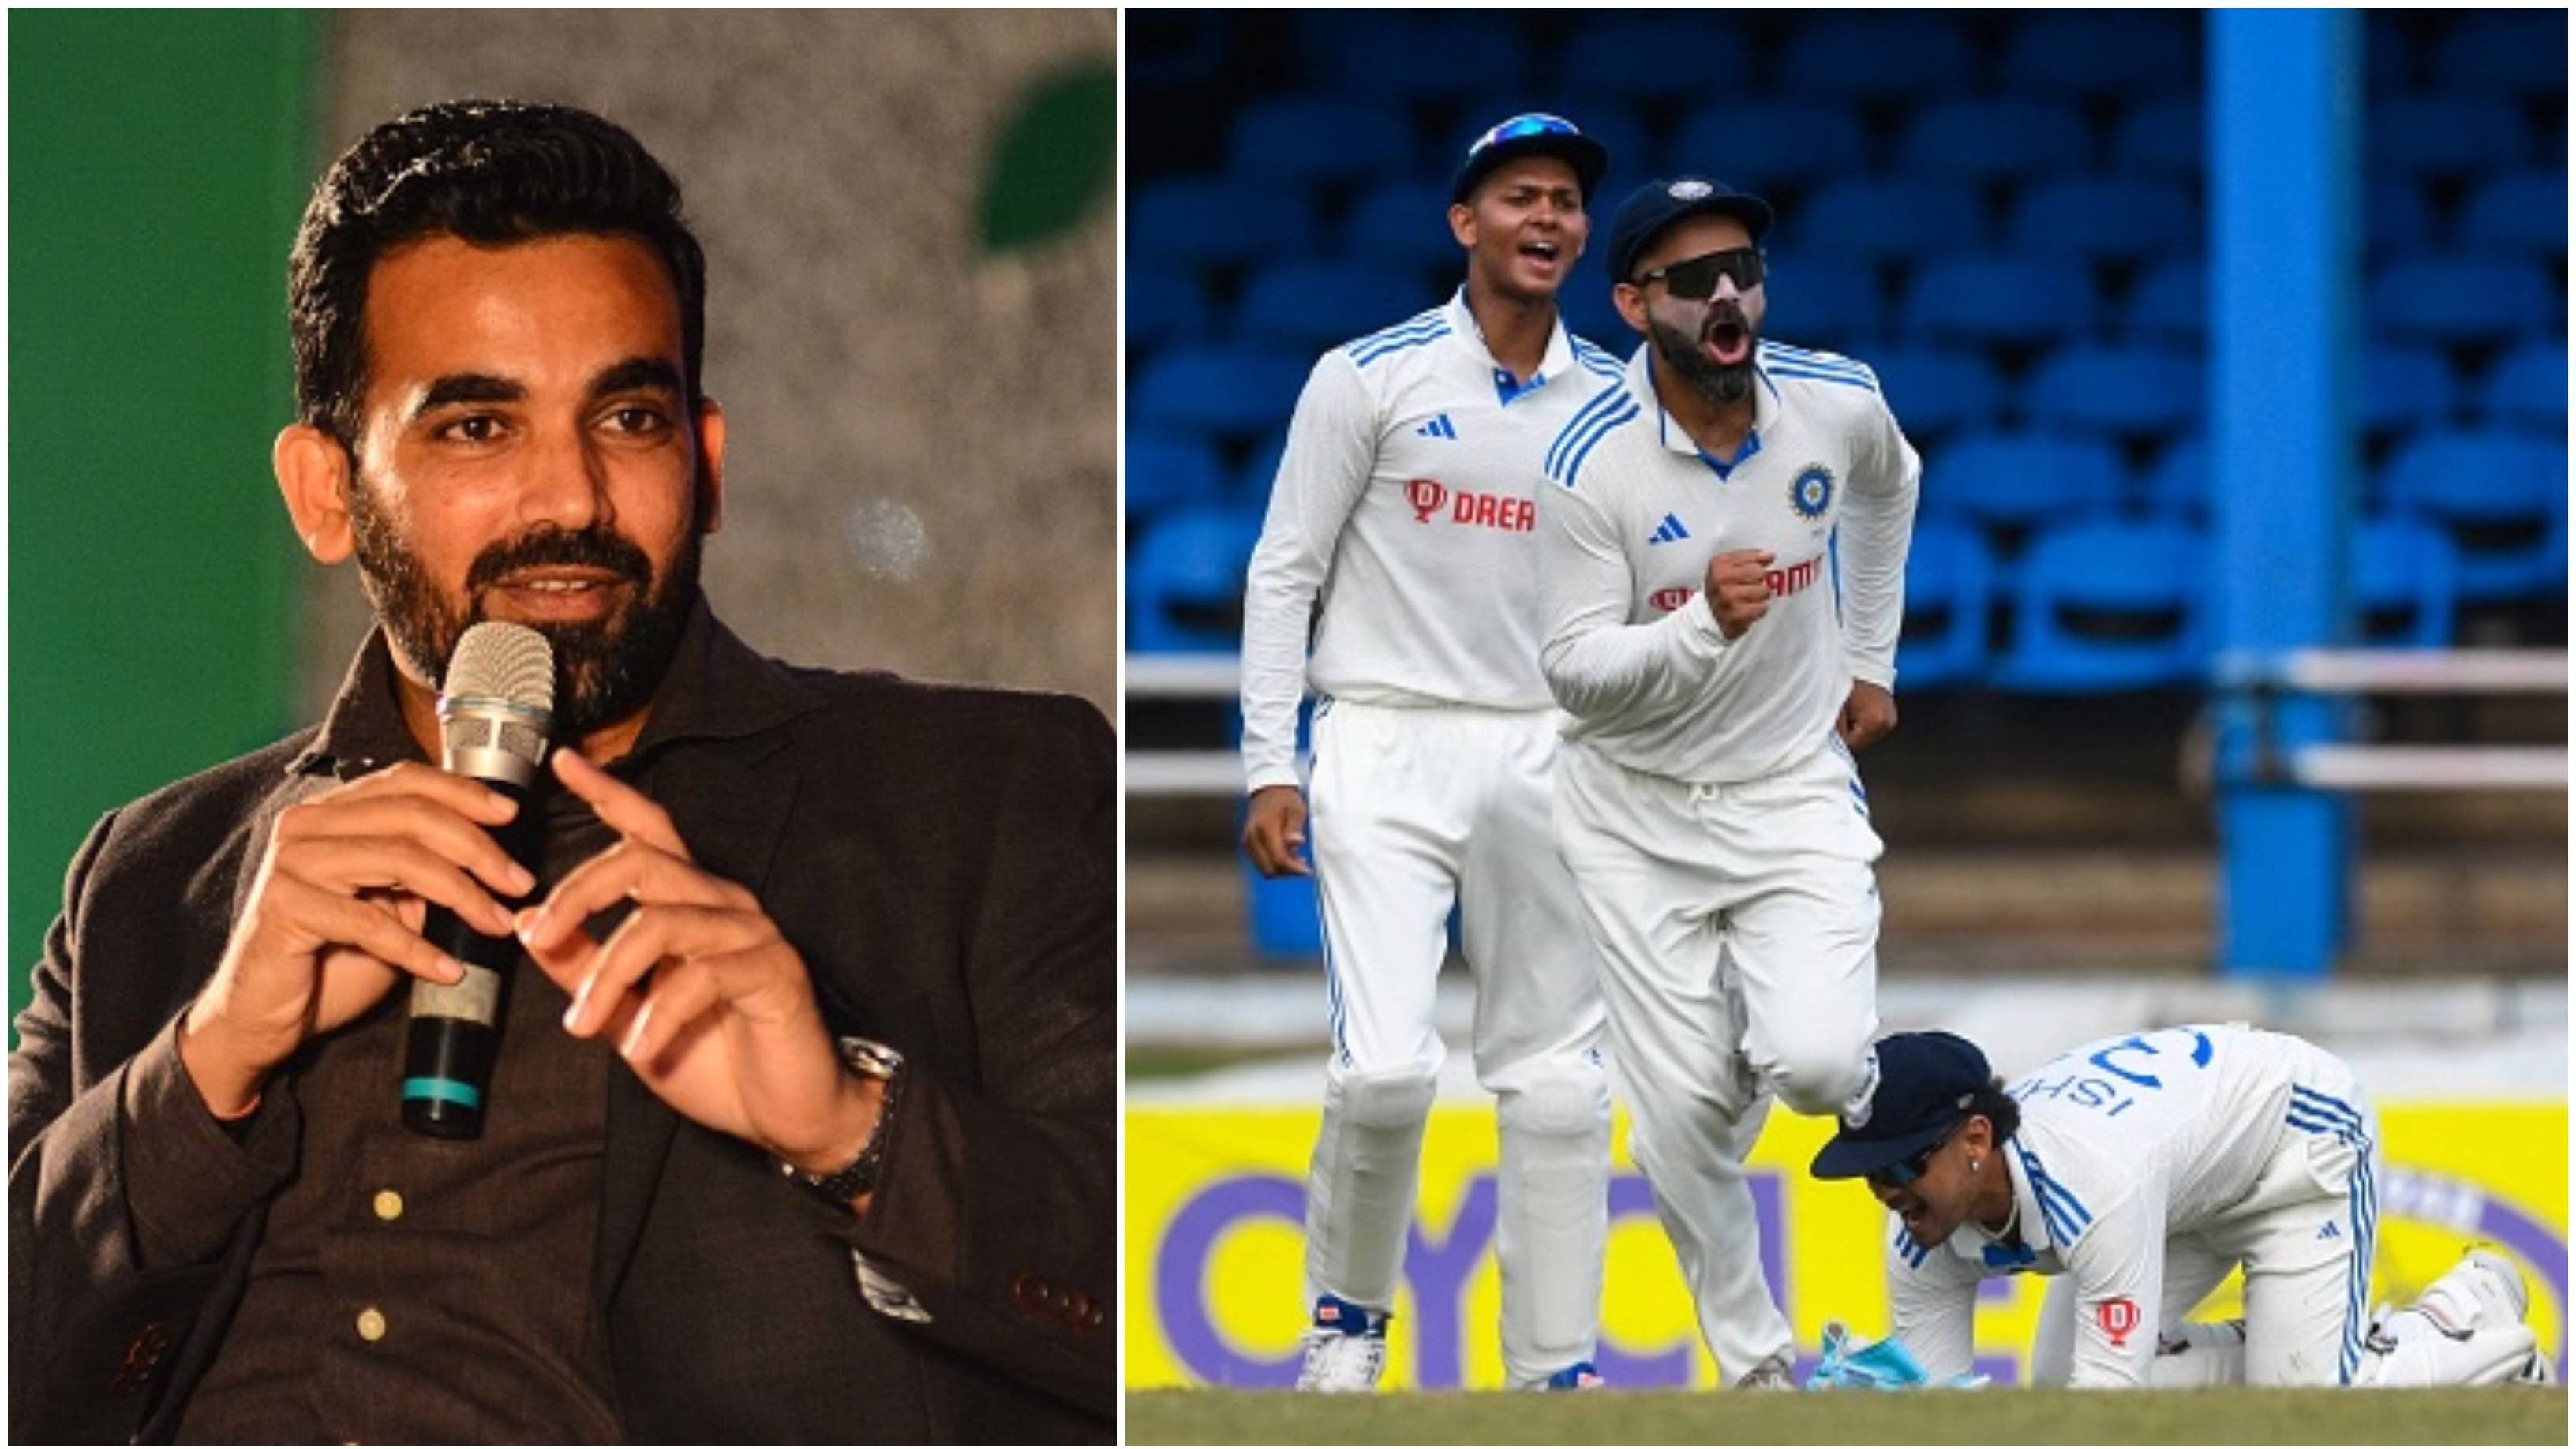 WI v IND 2023: “Mentor role going to be expected of Virat Kohli at this stage in his career,” says Zaheer Khan